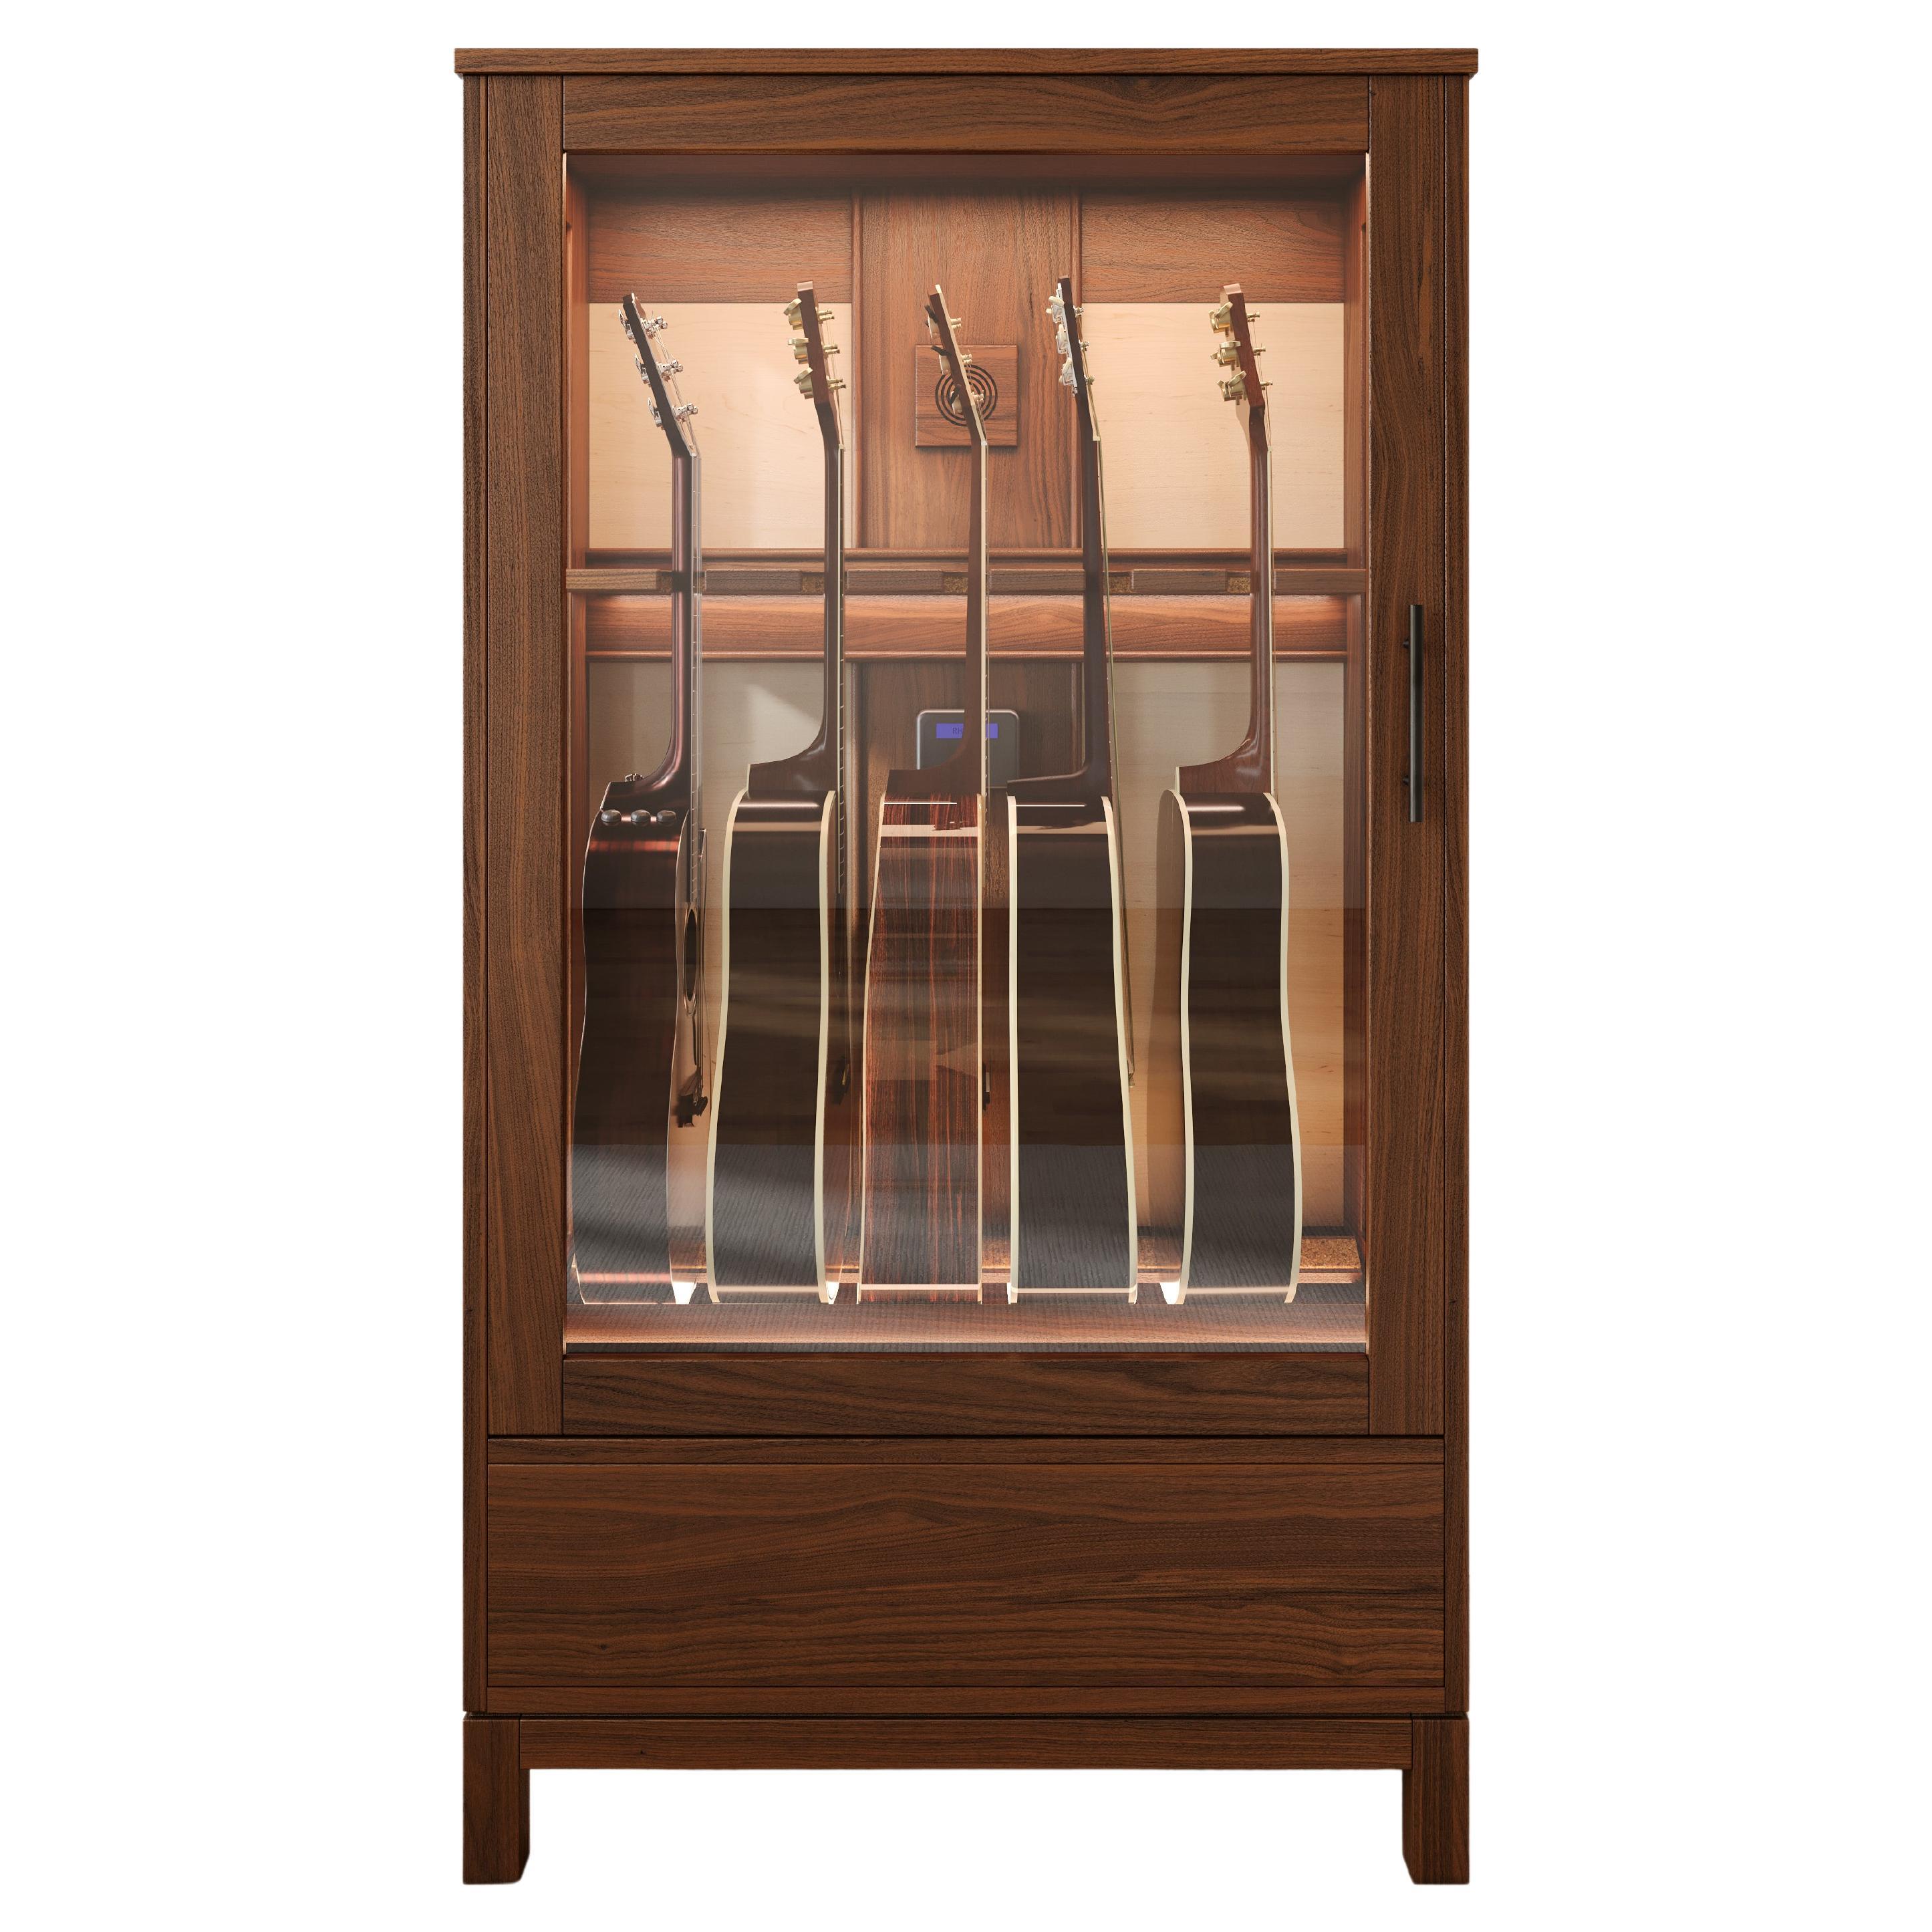 Humidified Guitar Display Case - Small Habitat Humidified Cabinet For Sale